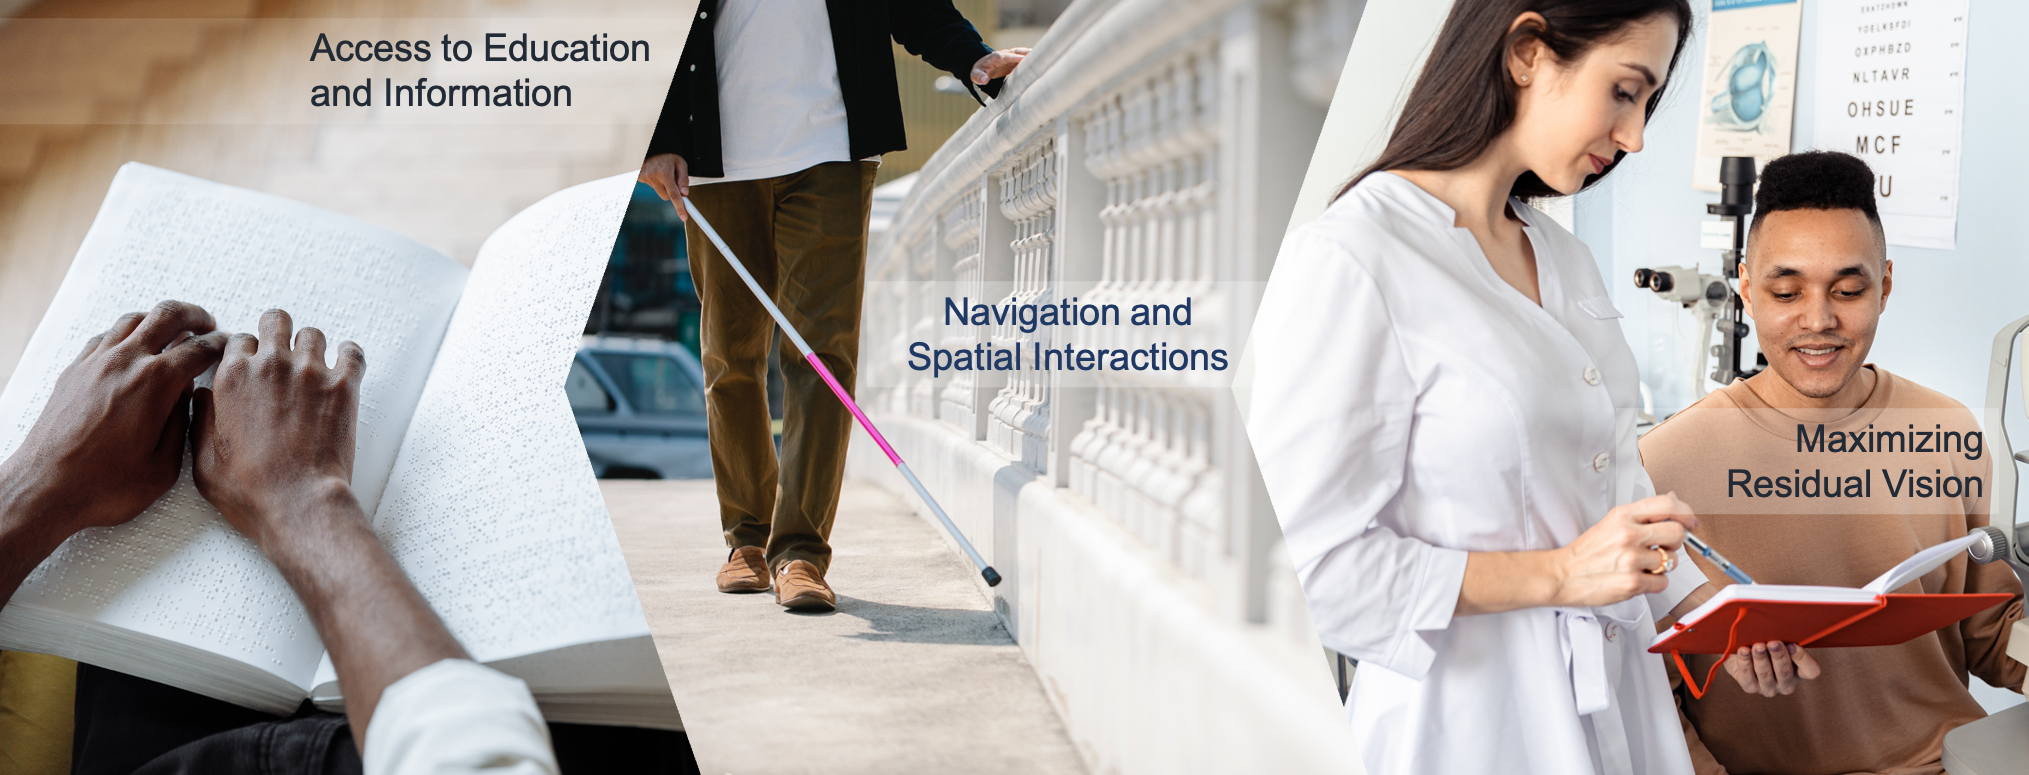 photos of hands reading Braille, man on a side walk with a white cane, patient &amp; healthcare provider in an ophthalmology office. Respective labels: Access to Education &amp; Information, Navigation &amp; Spatial Interactions, Maximizing Residual Vision